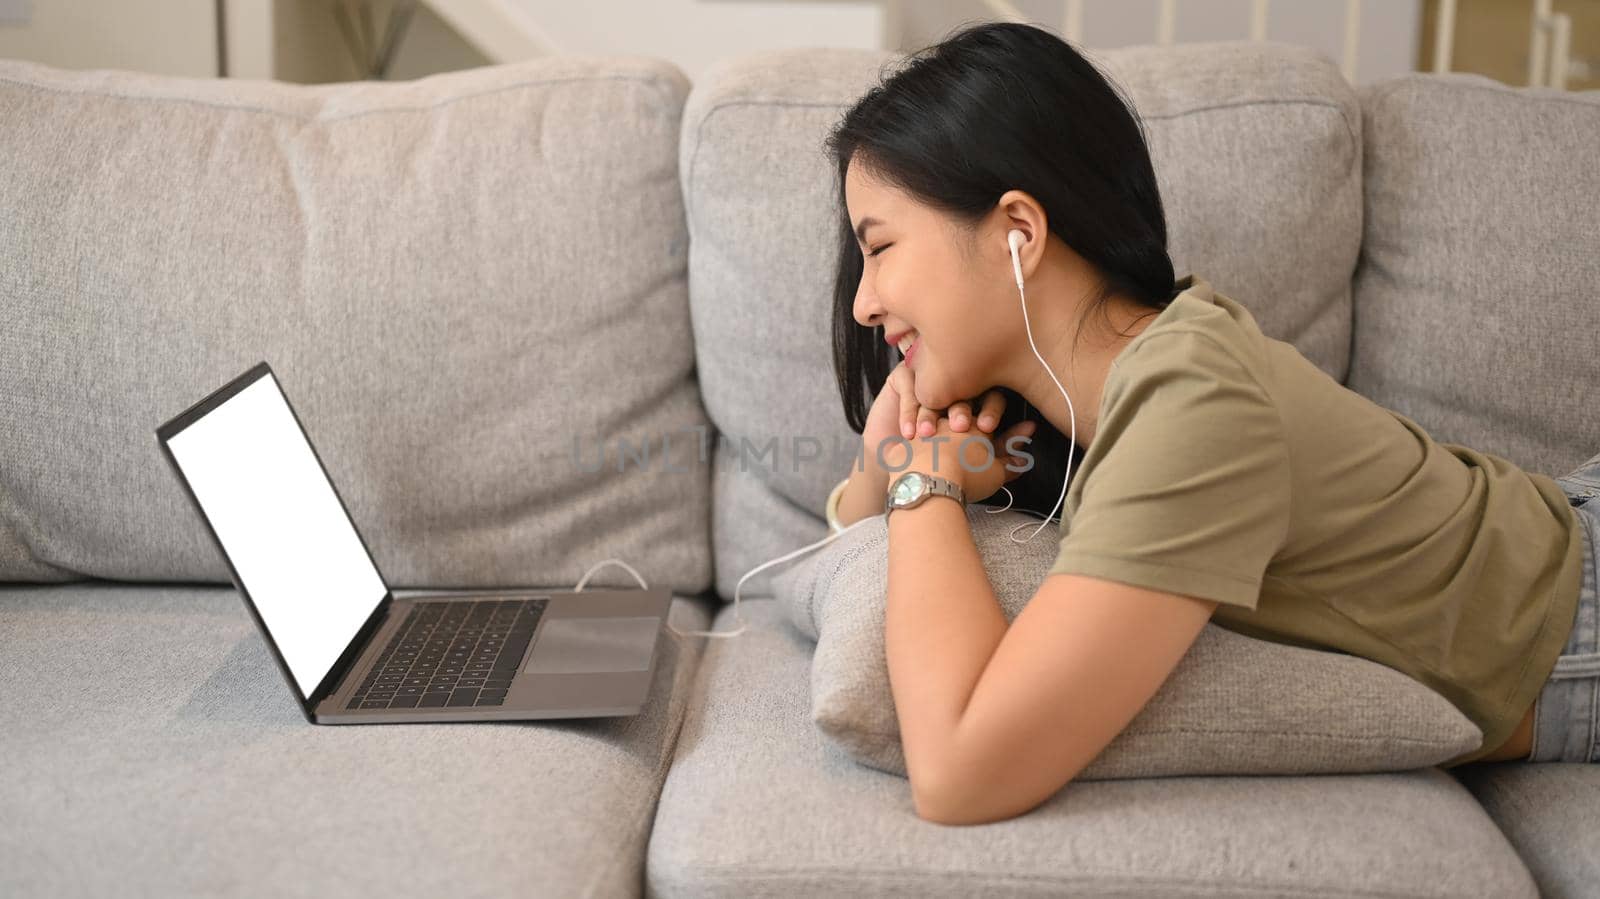 Smiling young woman relaxing in living room and talking by online virtual chat on computer laptop. Leisure activity and technology concept by prathanchorruangsak